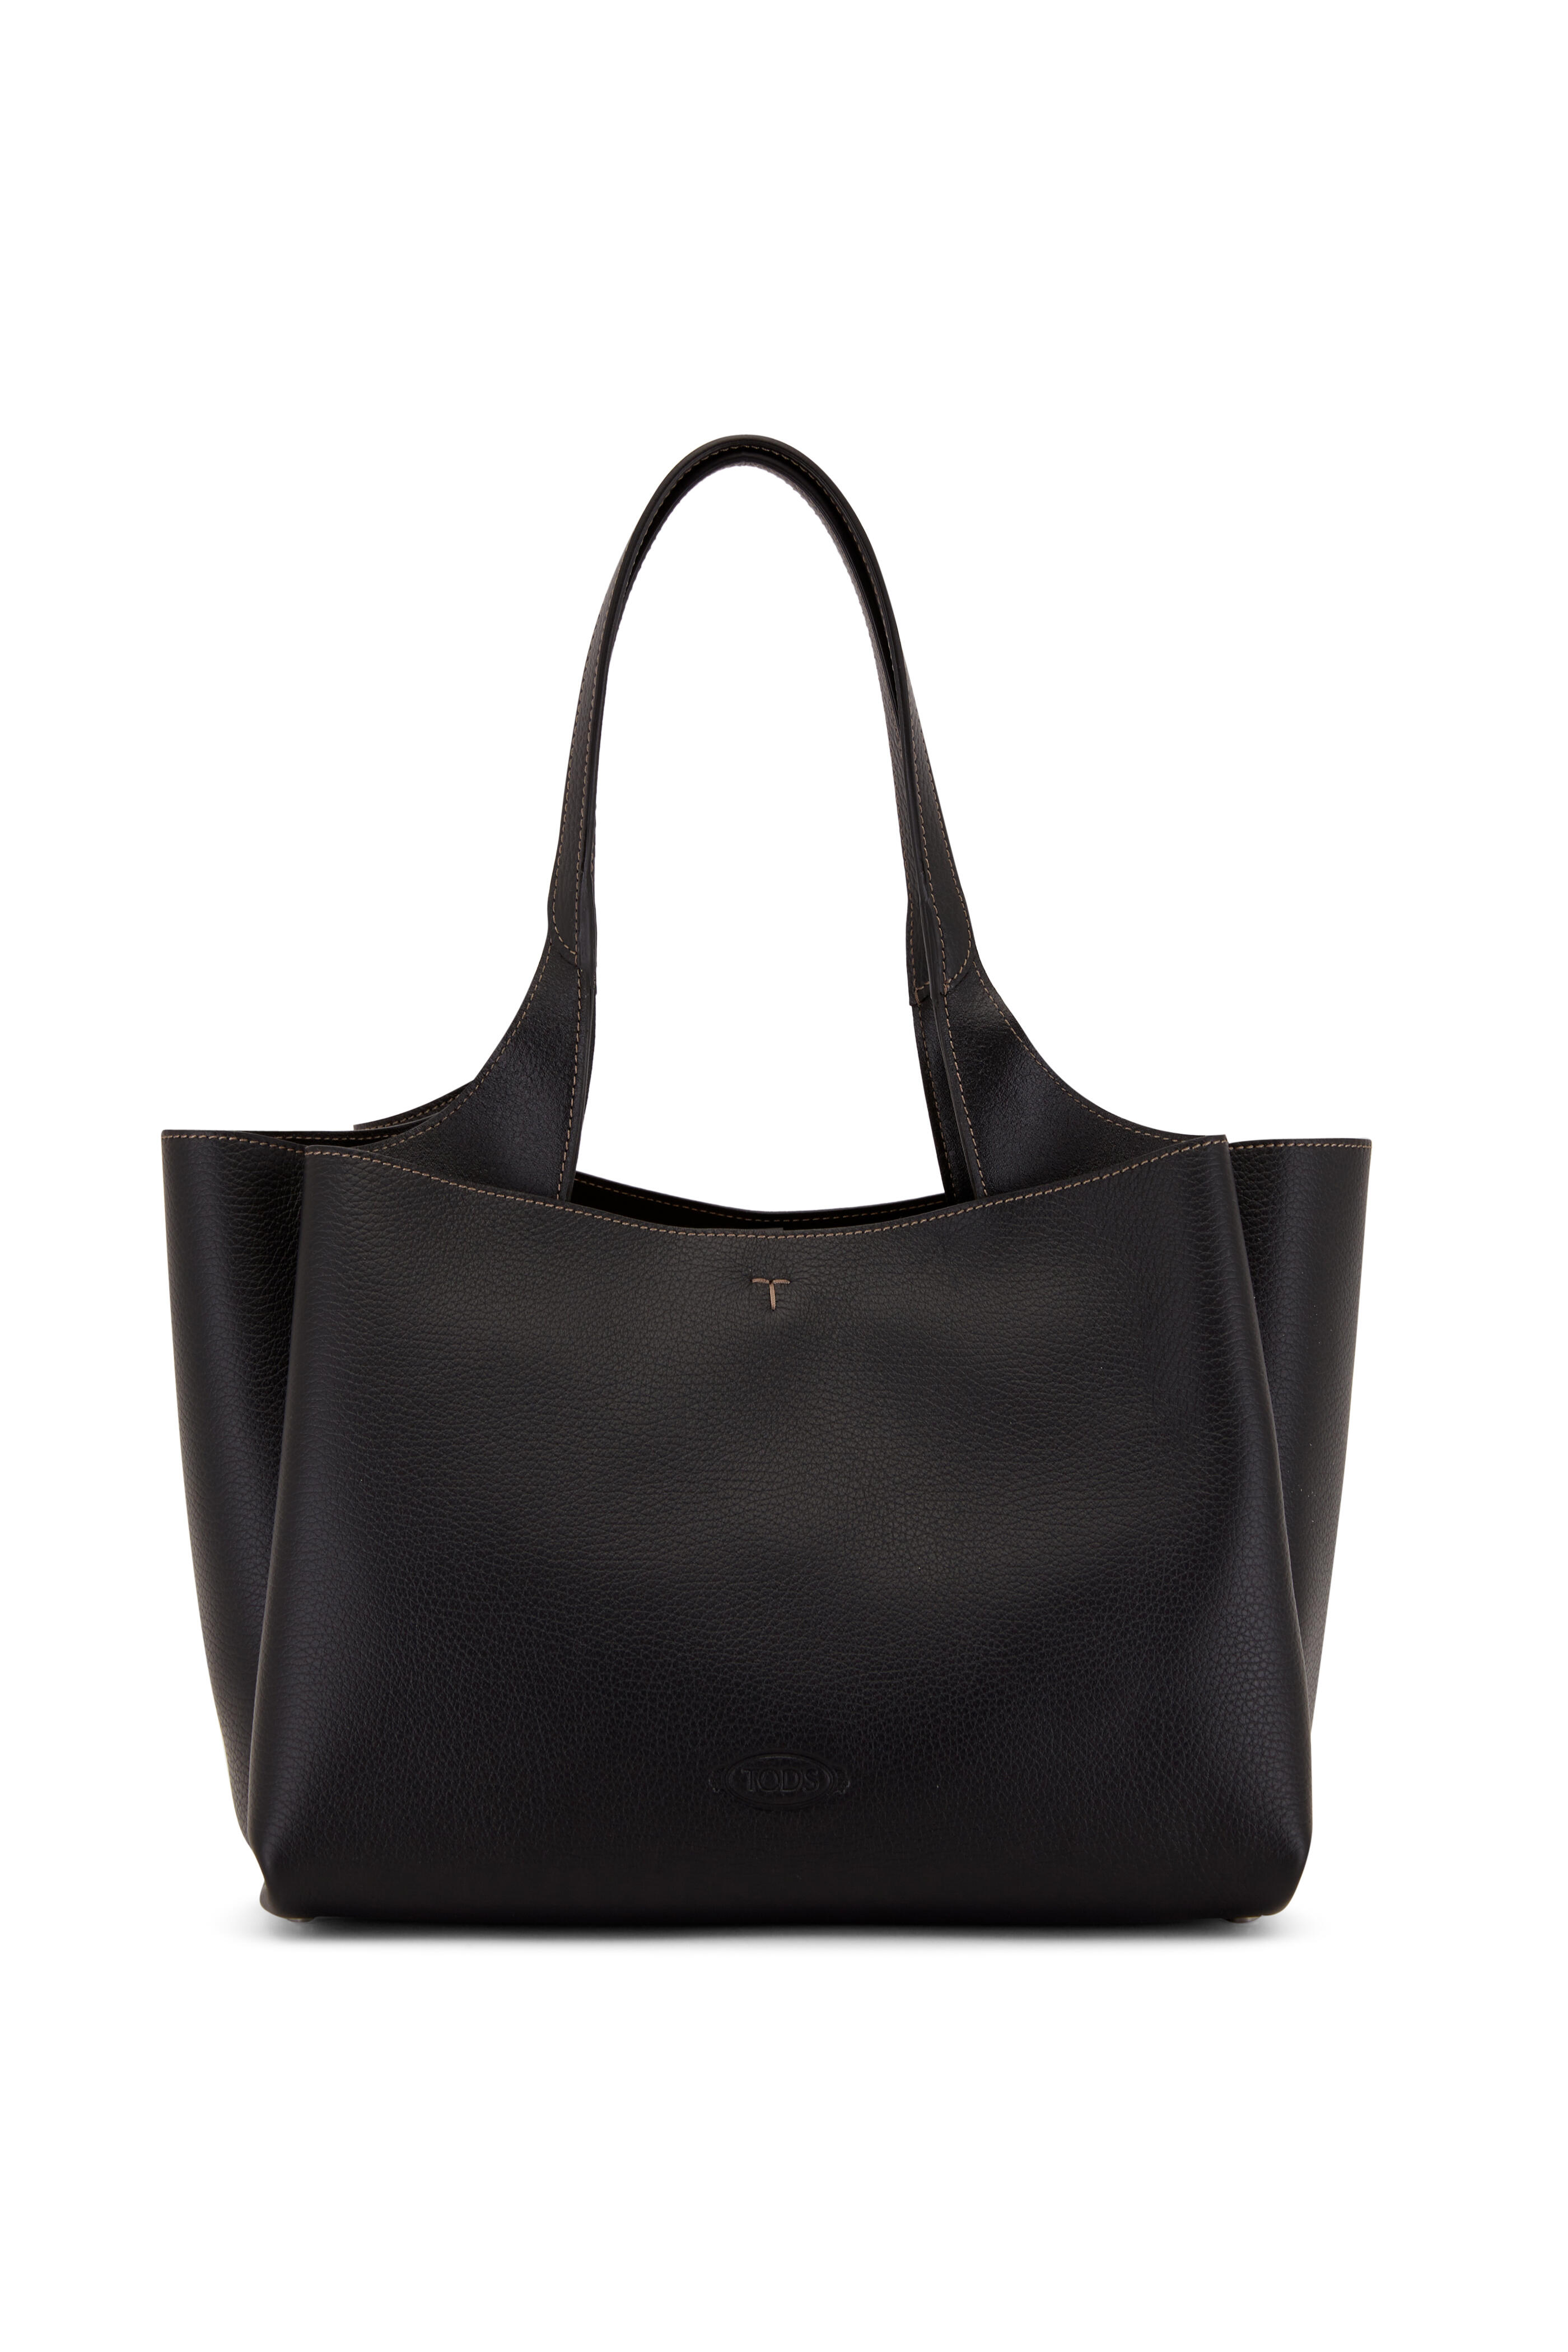 Tod's - Apa 200 Black Leather Tote | Mitchell Stores